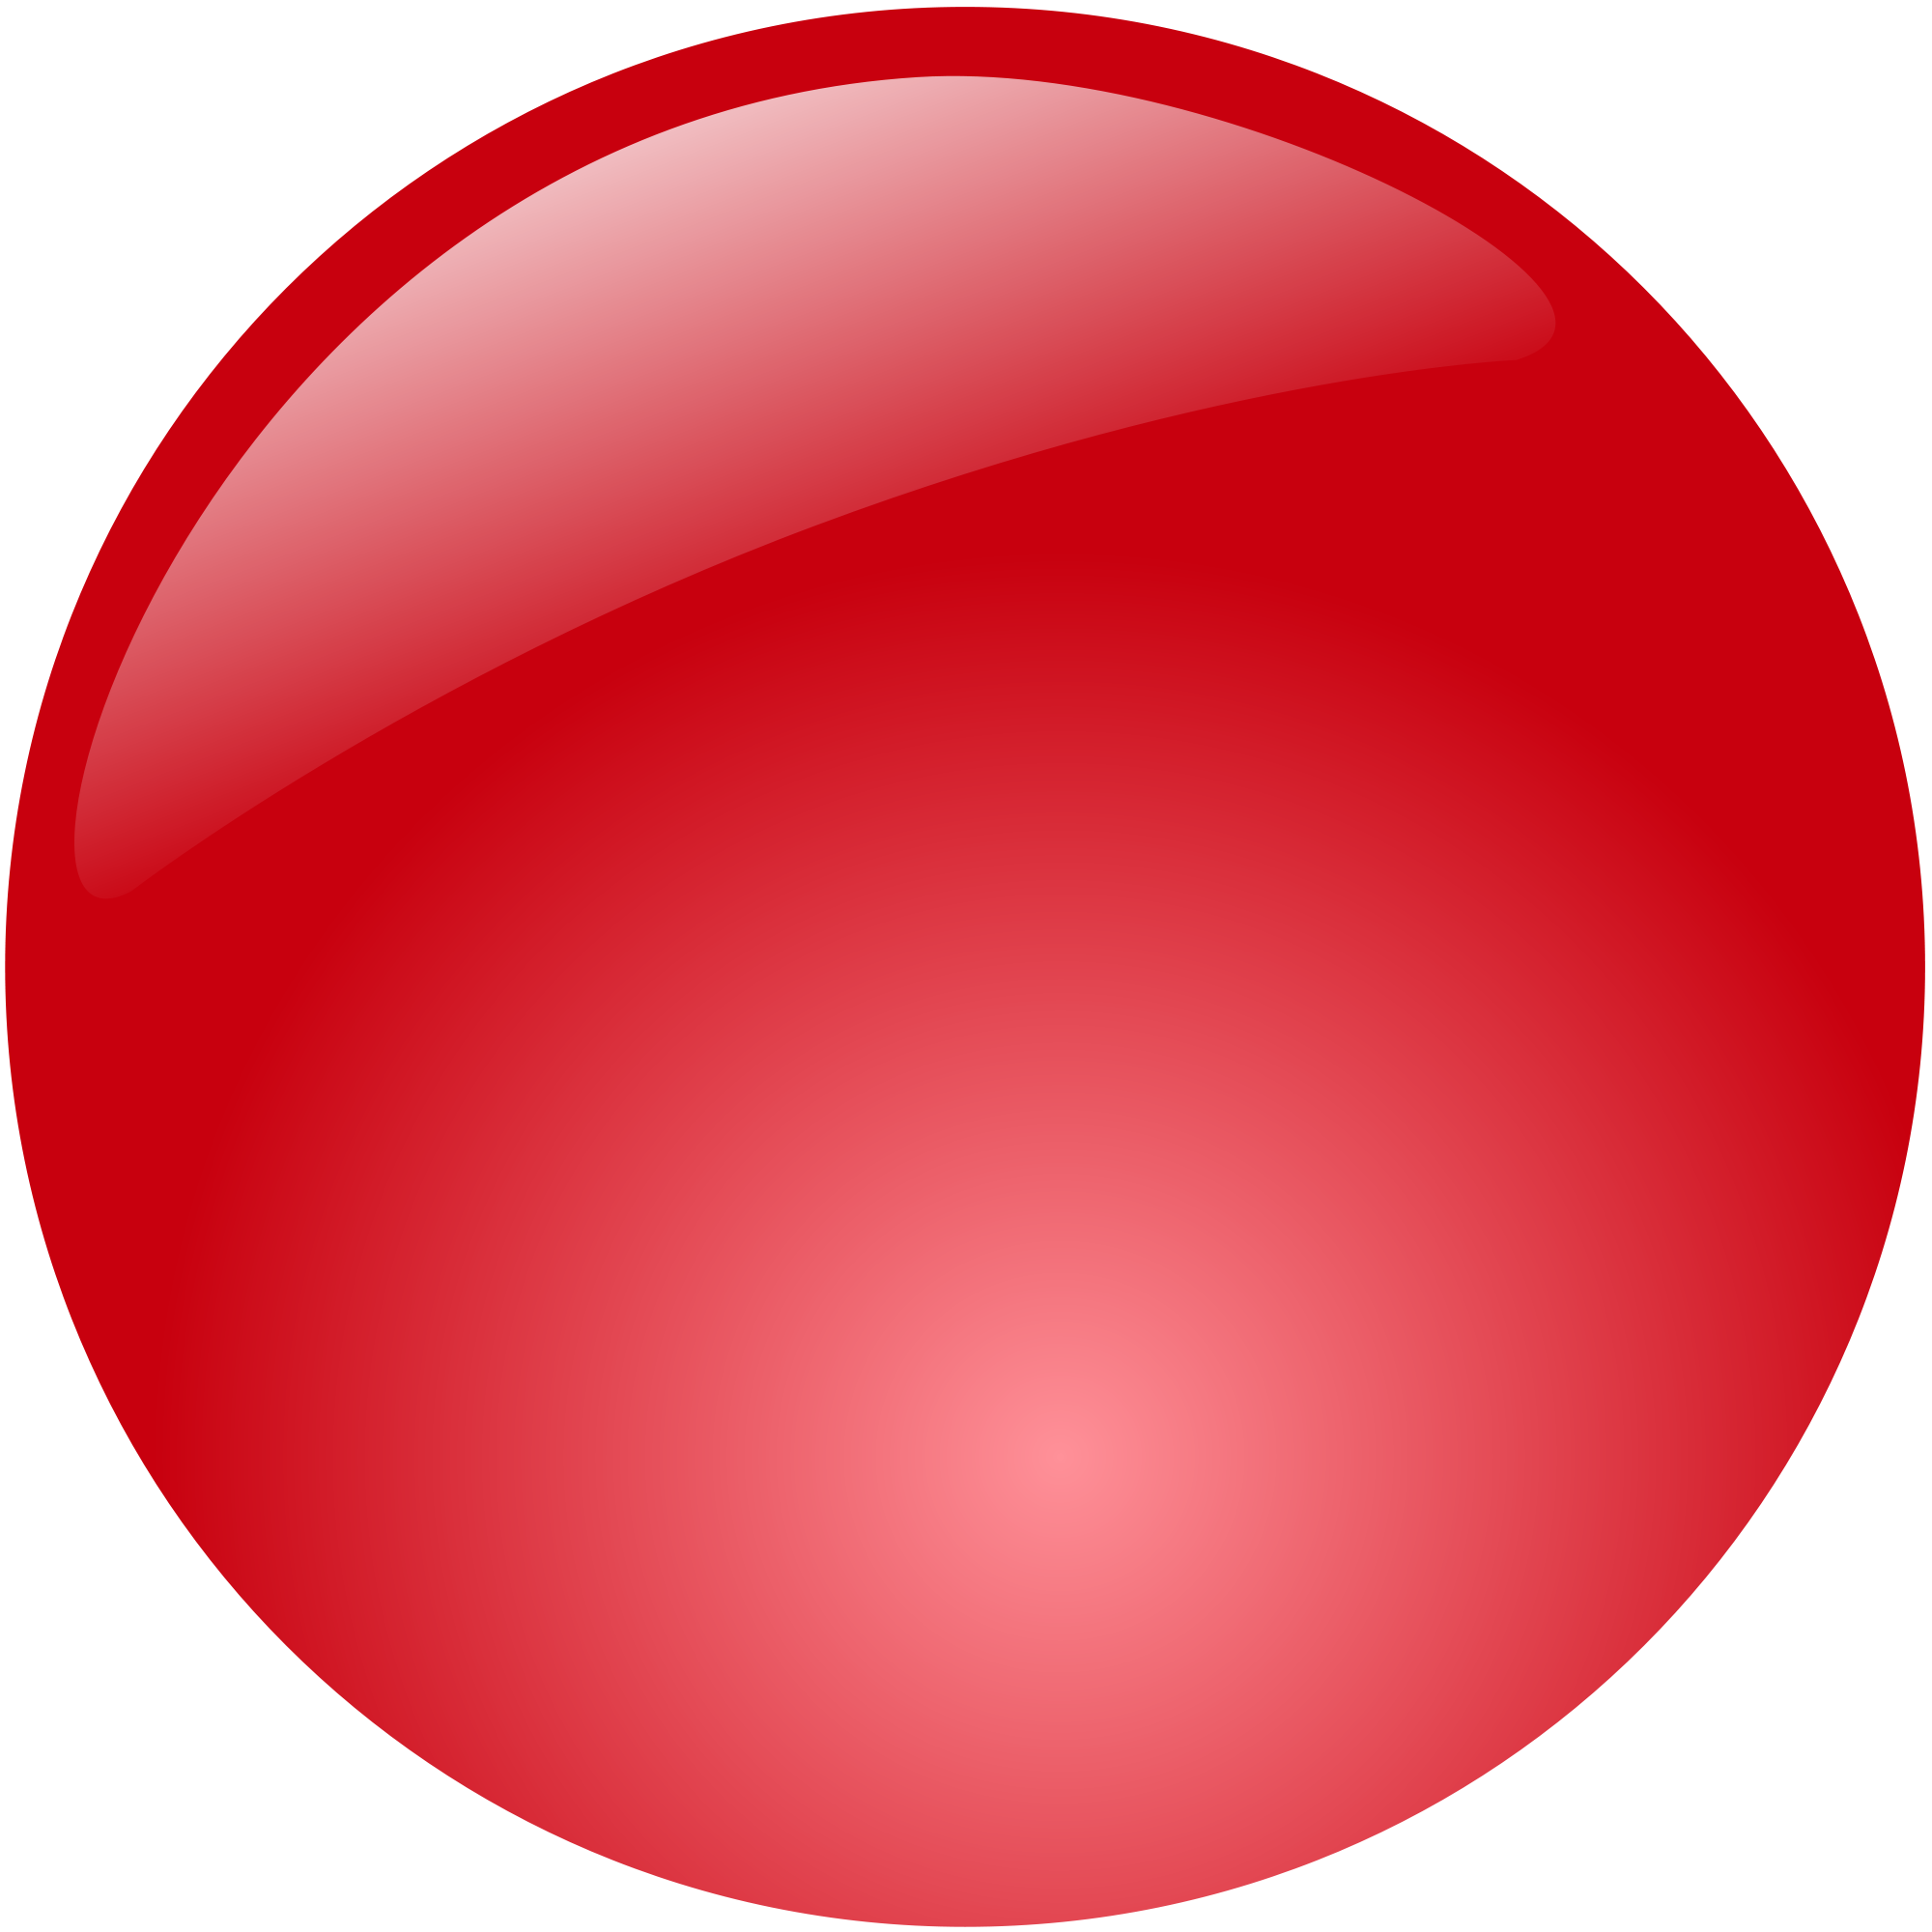 File:Glass button red.svg